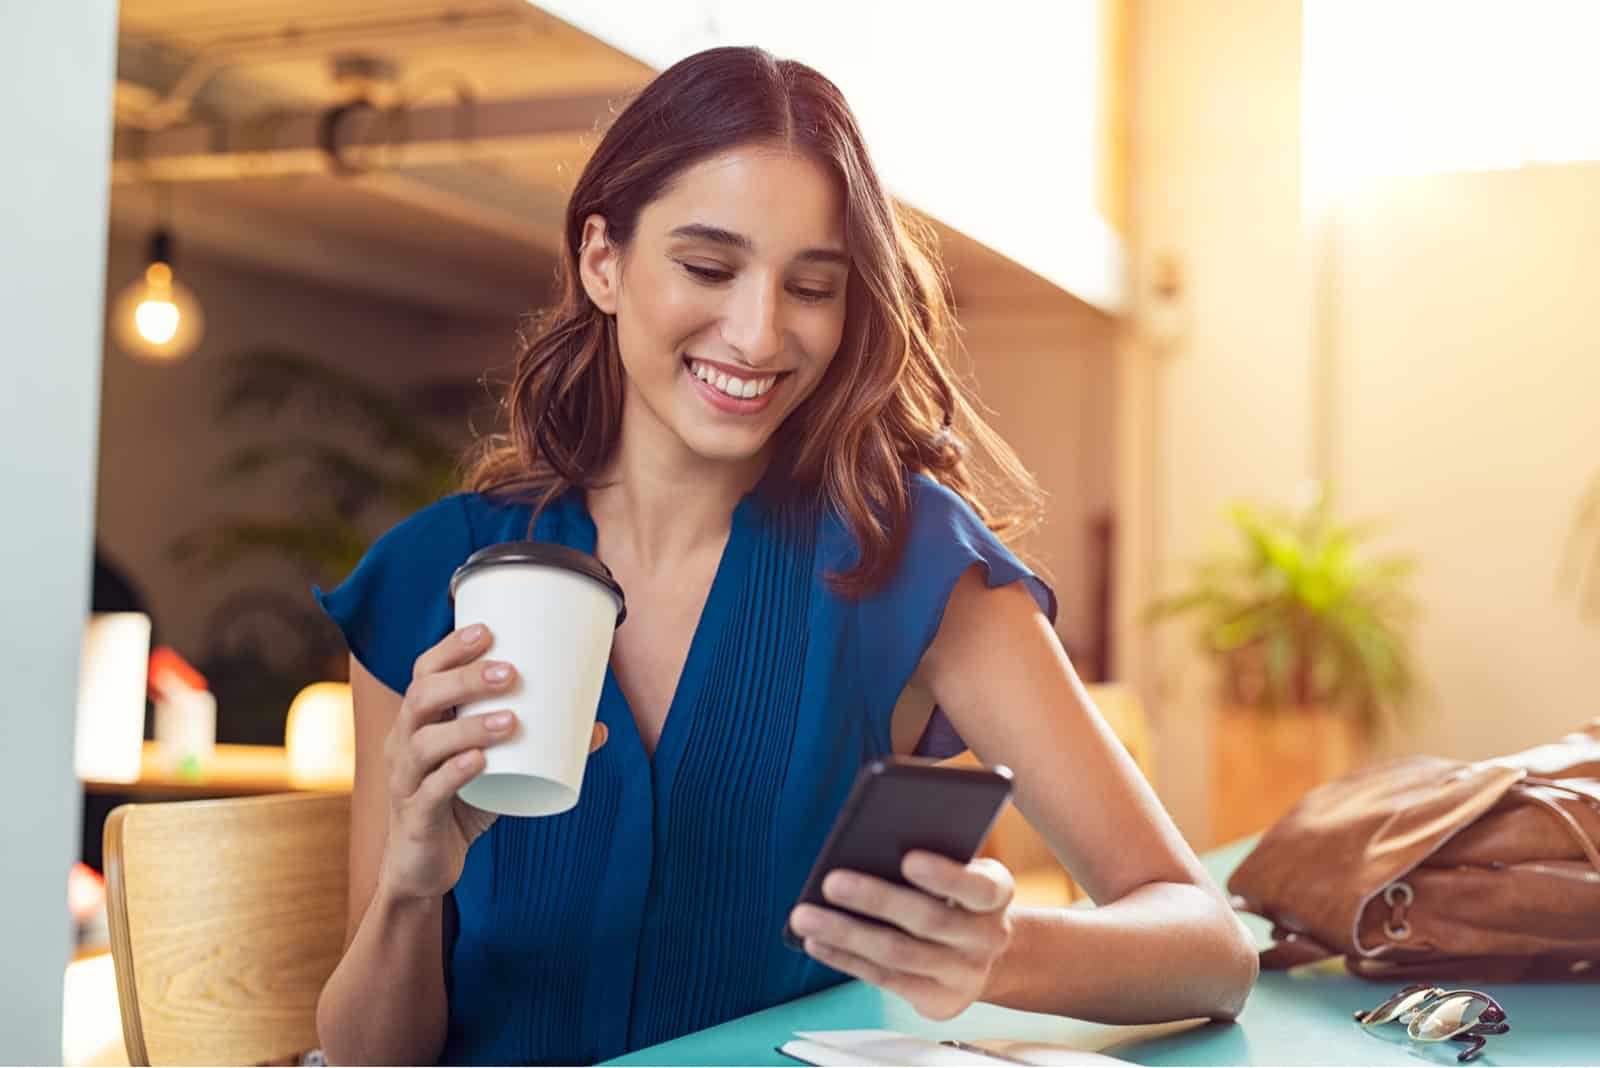 a young smiling woman sits at a table drinking coffee and holding a phone in her hand